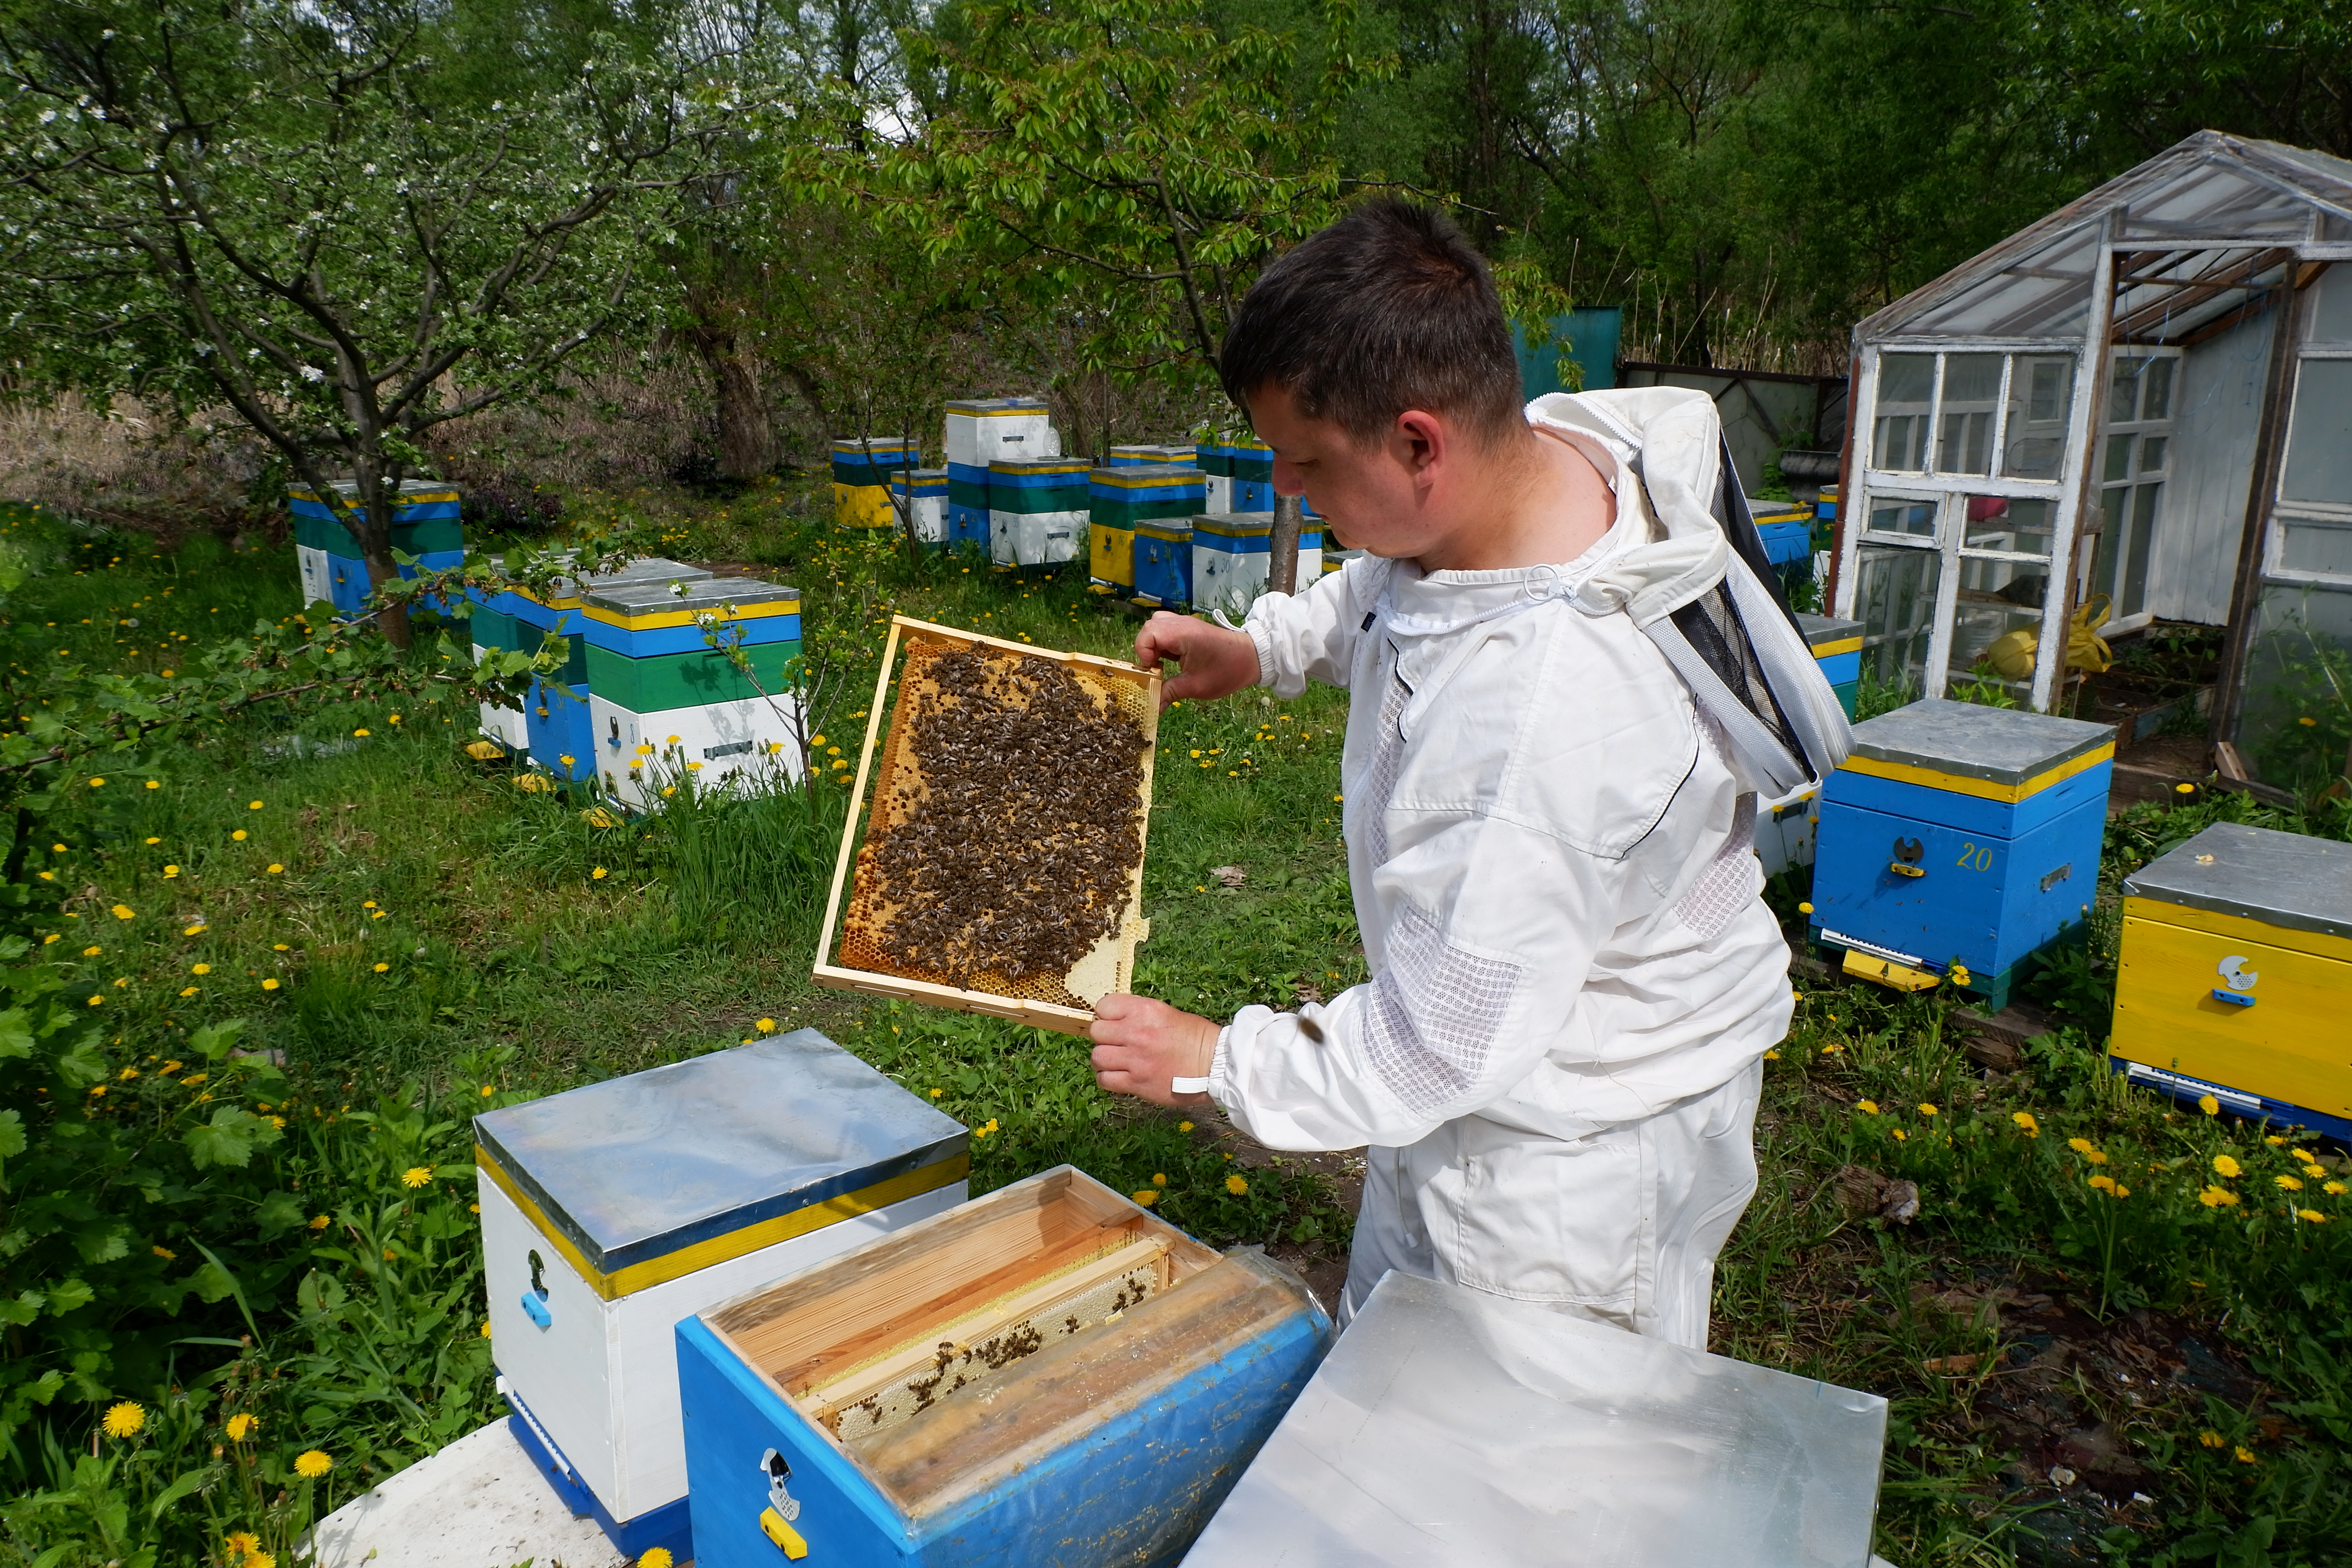 BEEKEEPER FROM KHARKIV OBLAST GETS READY TO MARKET HIS CREAMED HONEY WITH USAID ERA SUPPORT